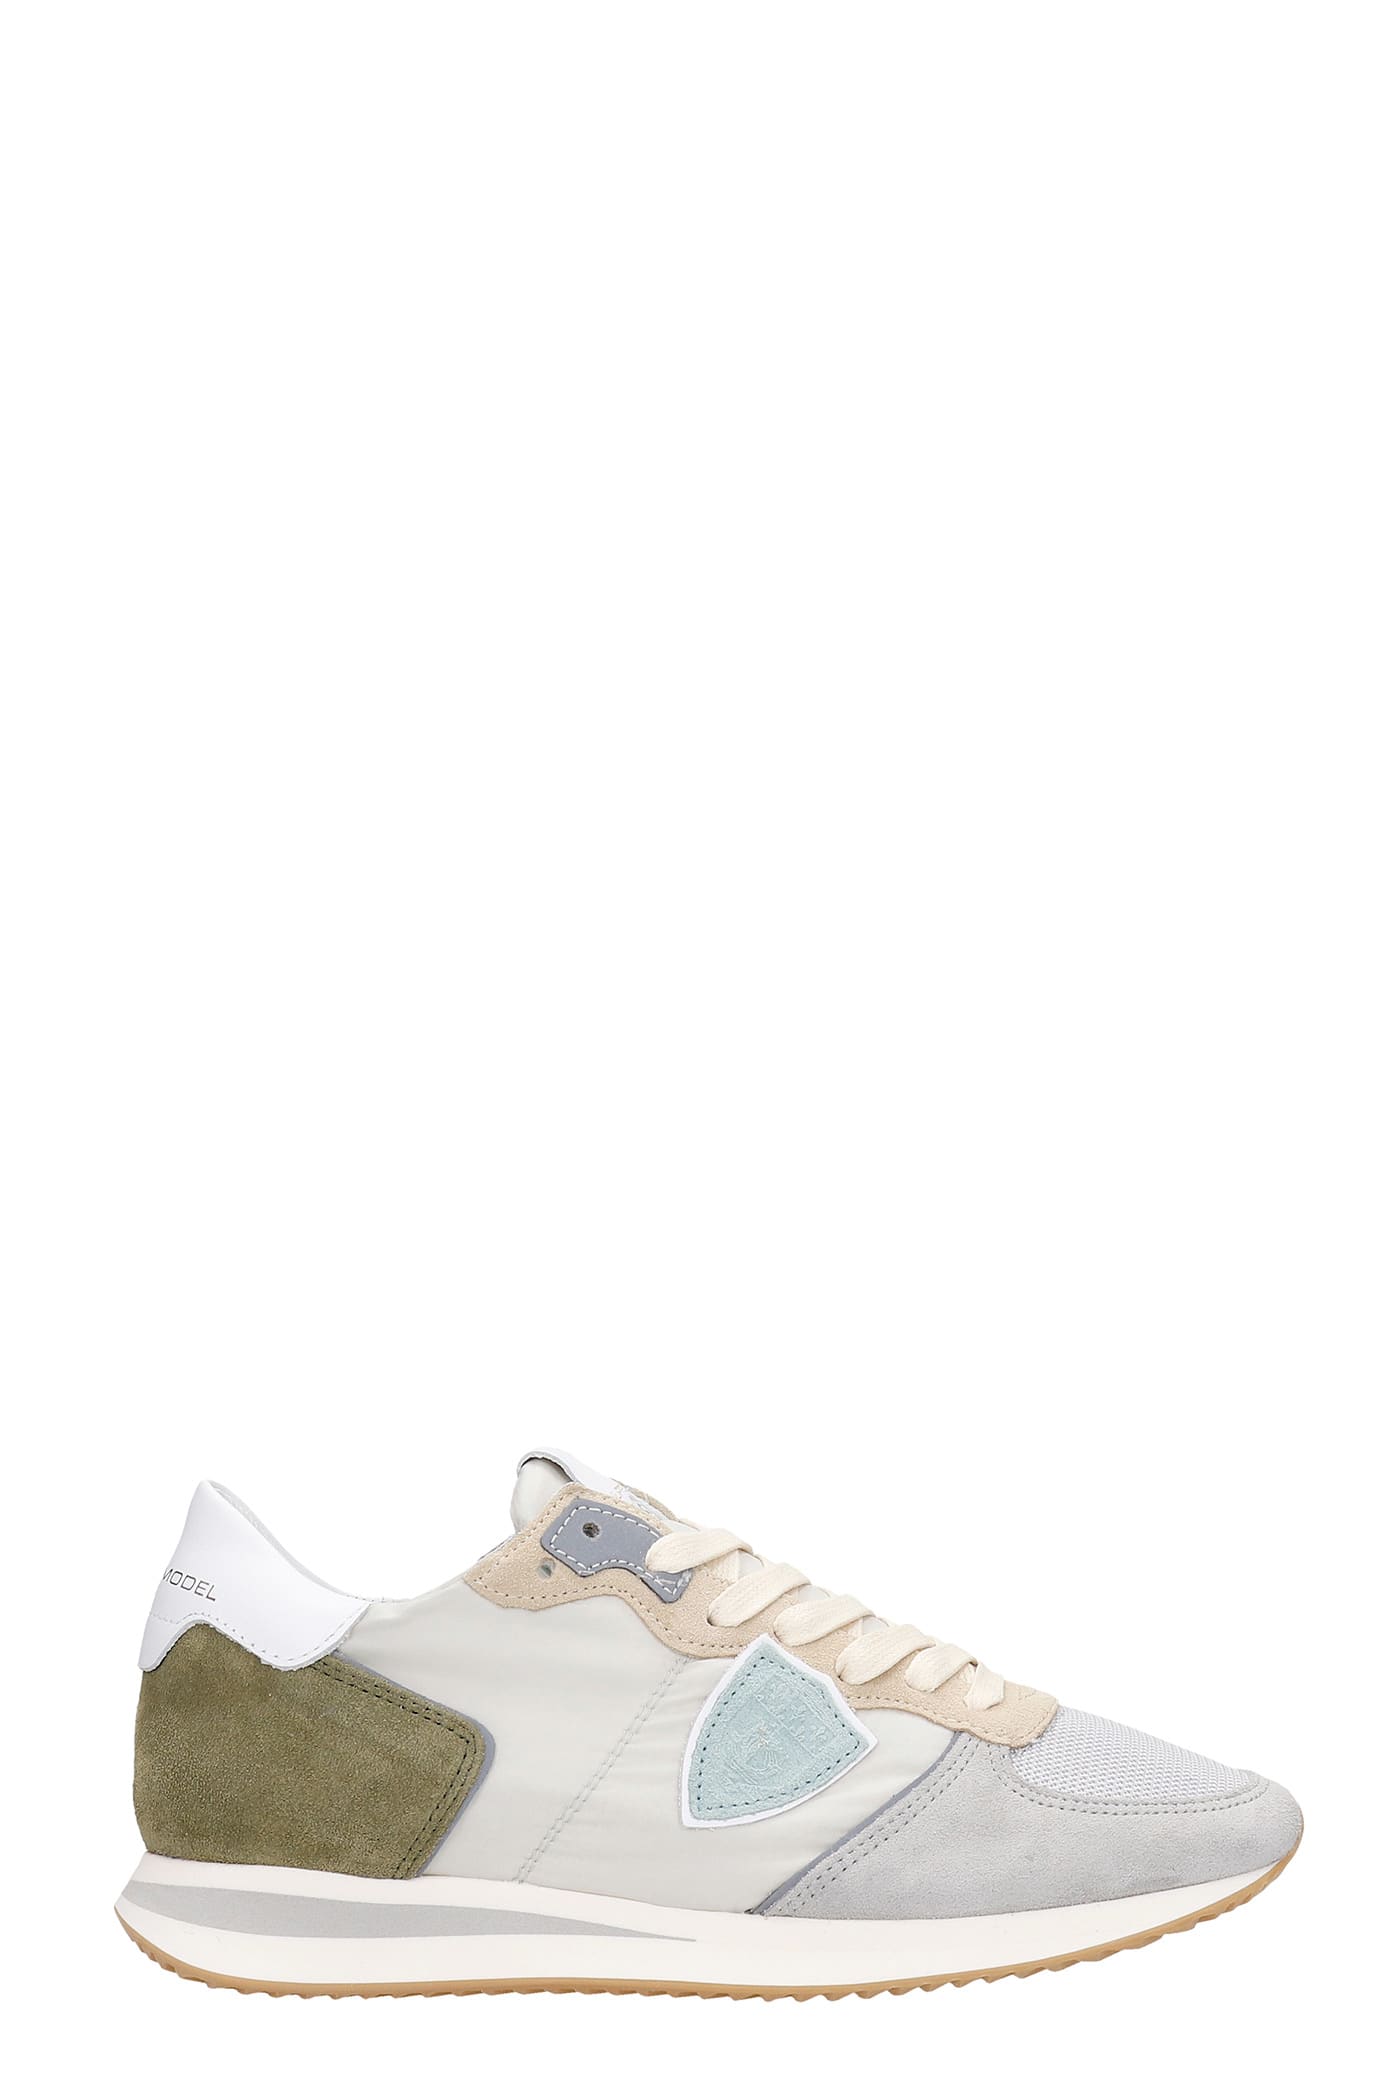 Philippe Model Trpx Sneakers In Grey Suede And Fabric